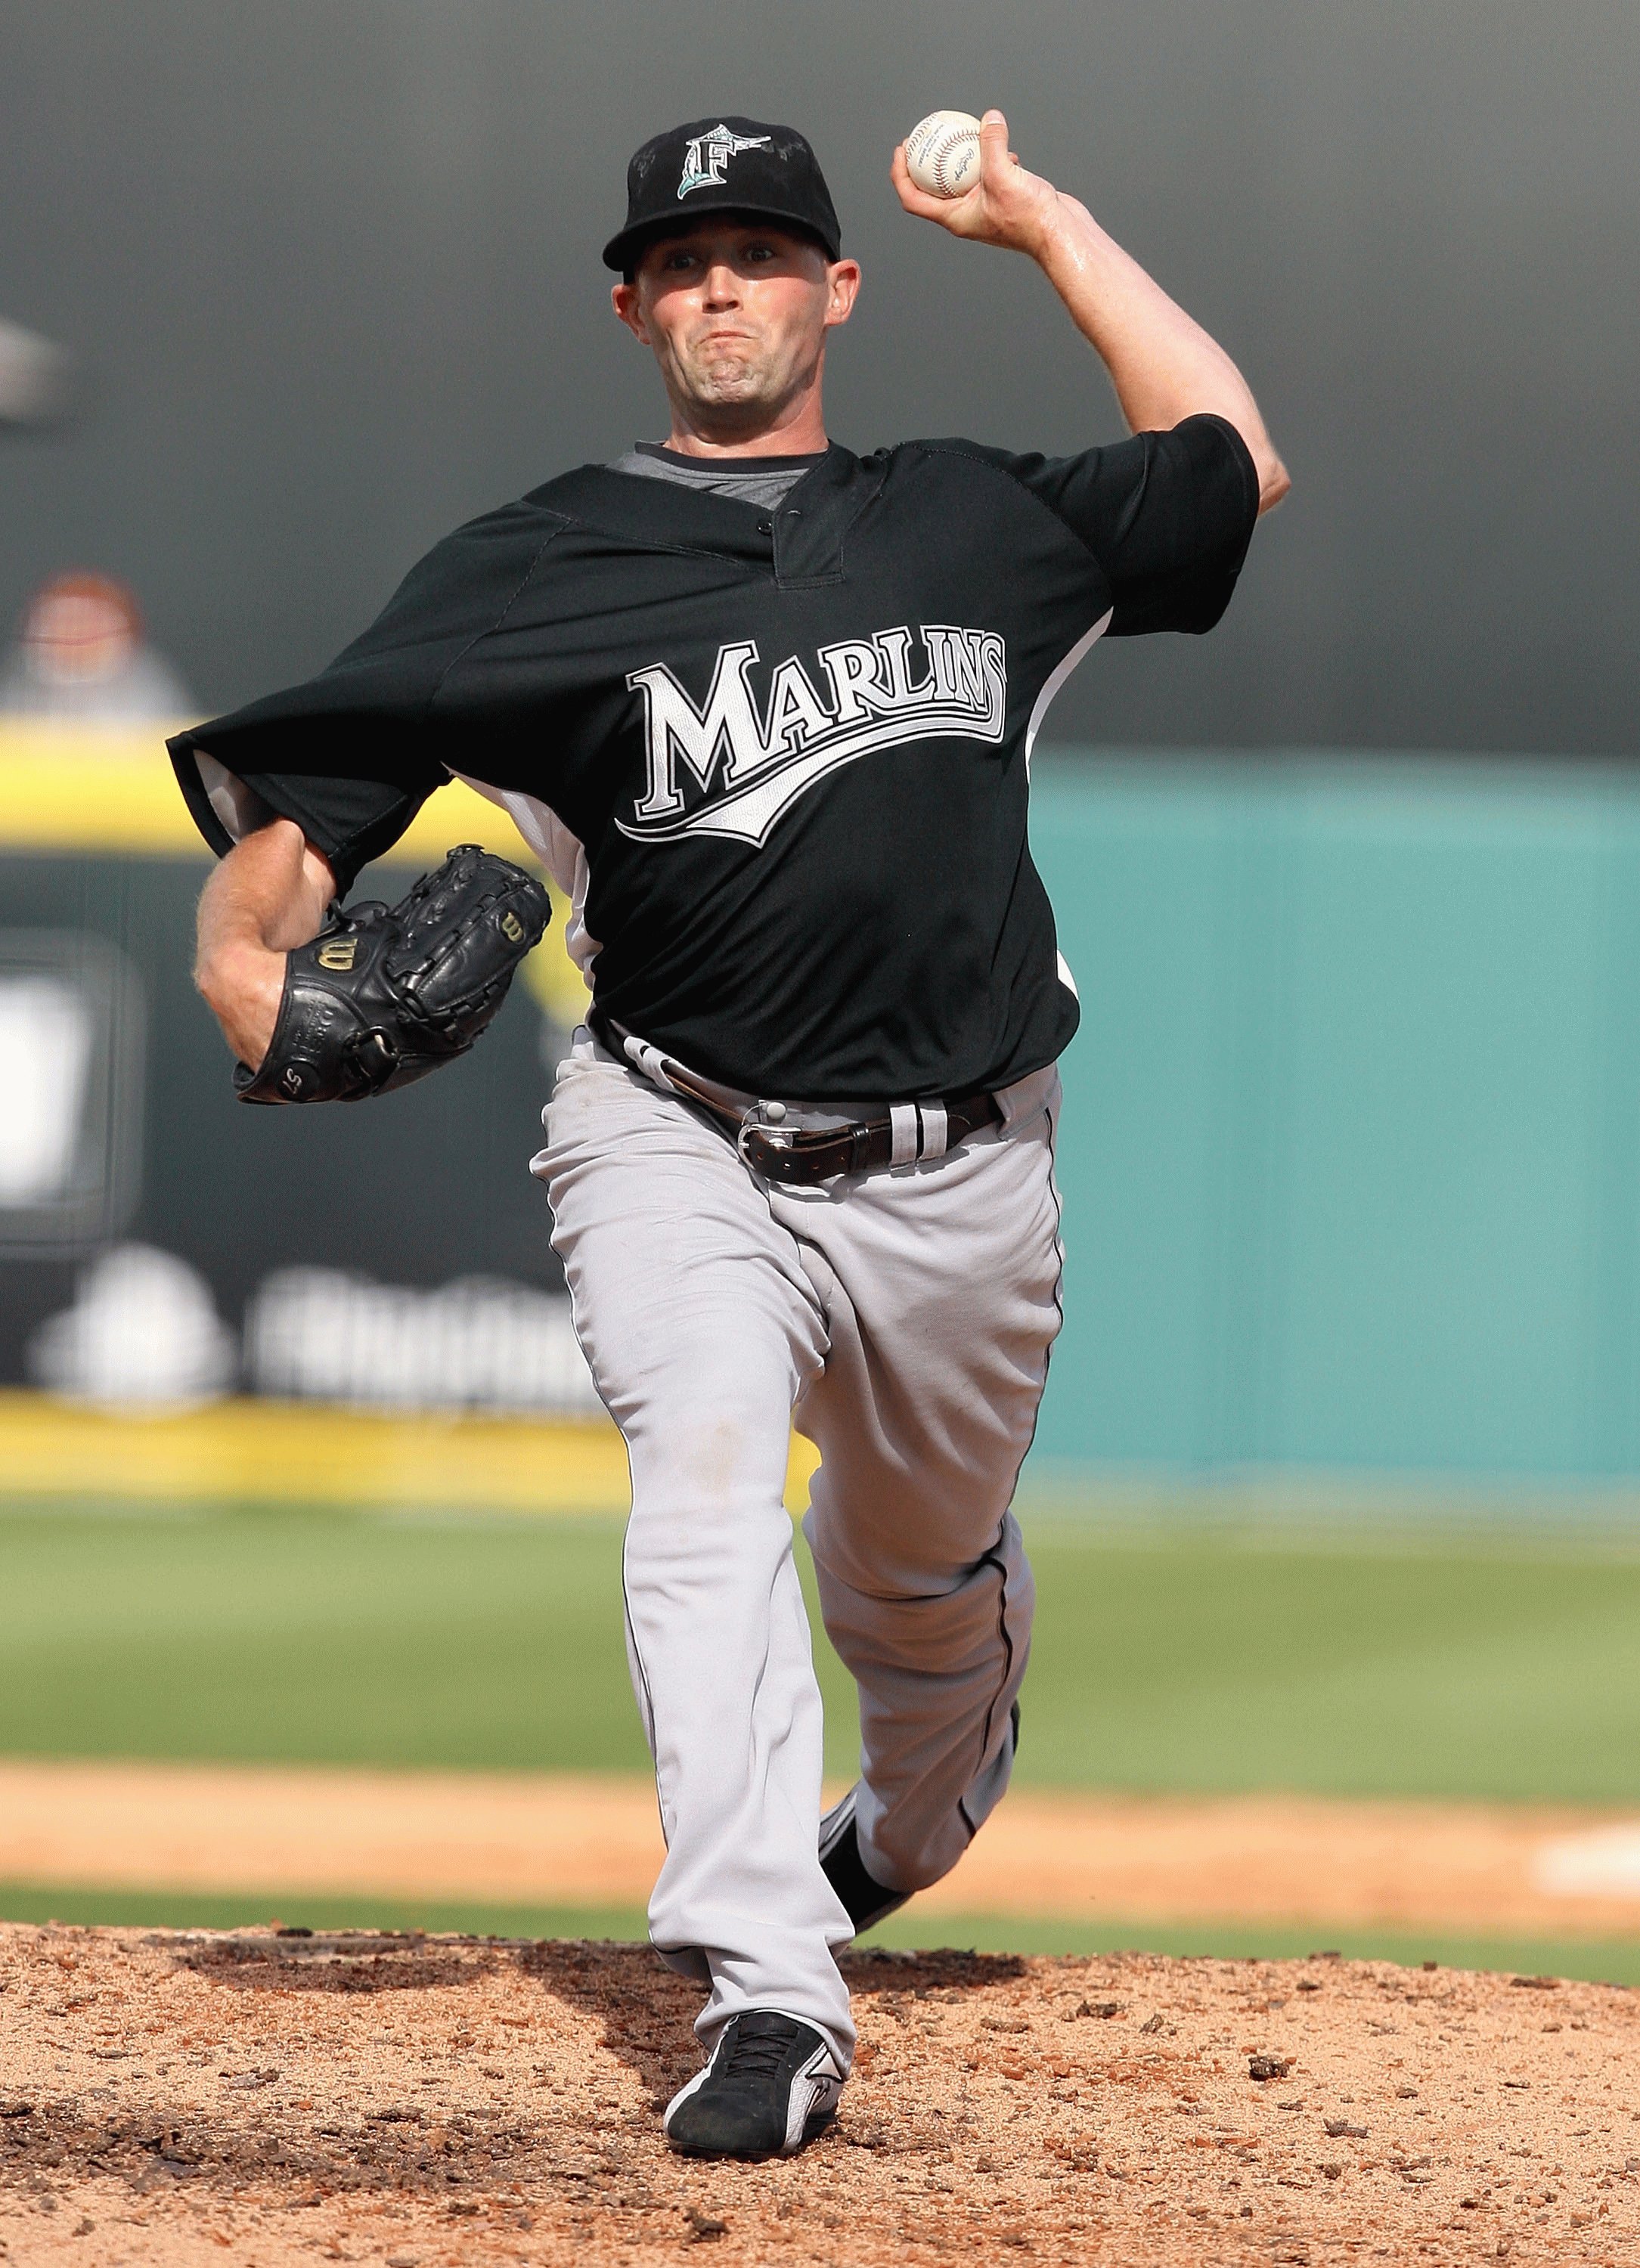 JUPITER, FL - FEBRUARY 25:  Pitcher Taylor Tankersley #57 of the Florida Marlins pitches against the St. Louis Cardinals during a spring training game at Roger Dean Stadium on February 25, 2009 in Jupiter, Florida. The Marlins and the Mets played to a 5-5